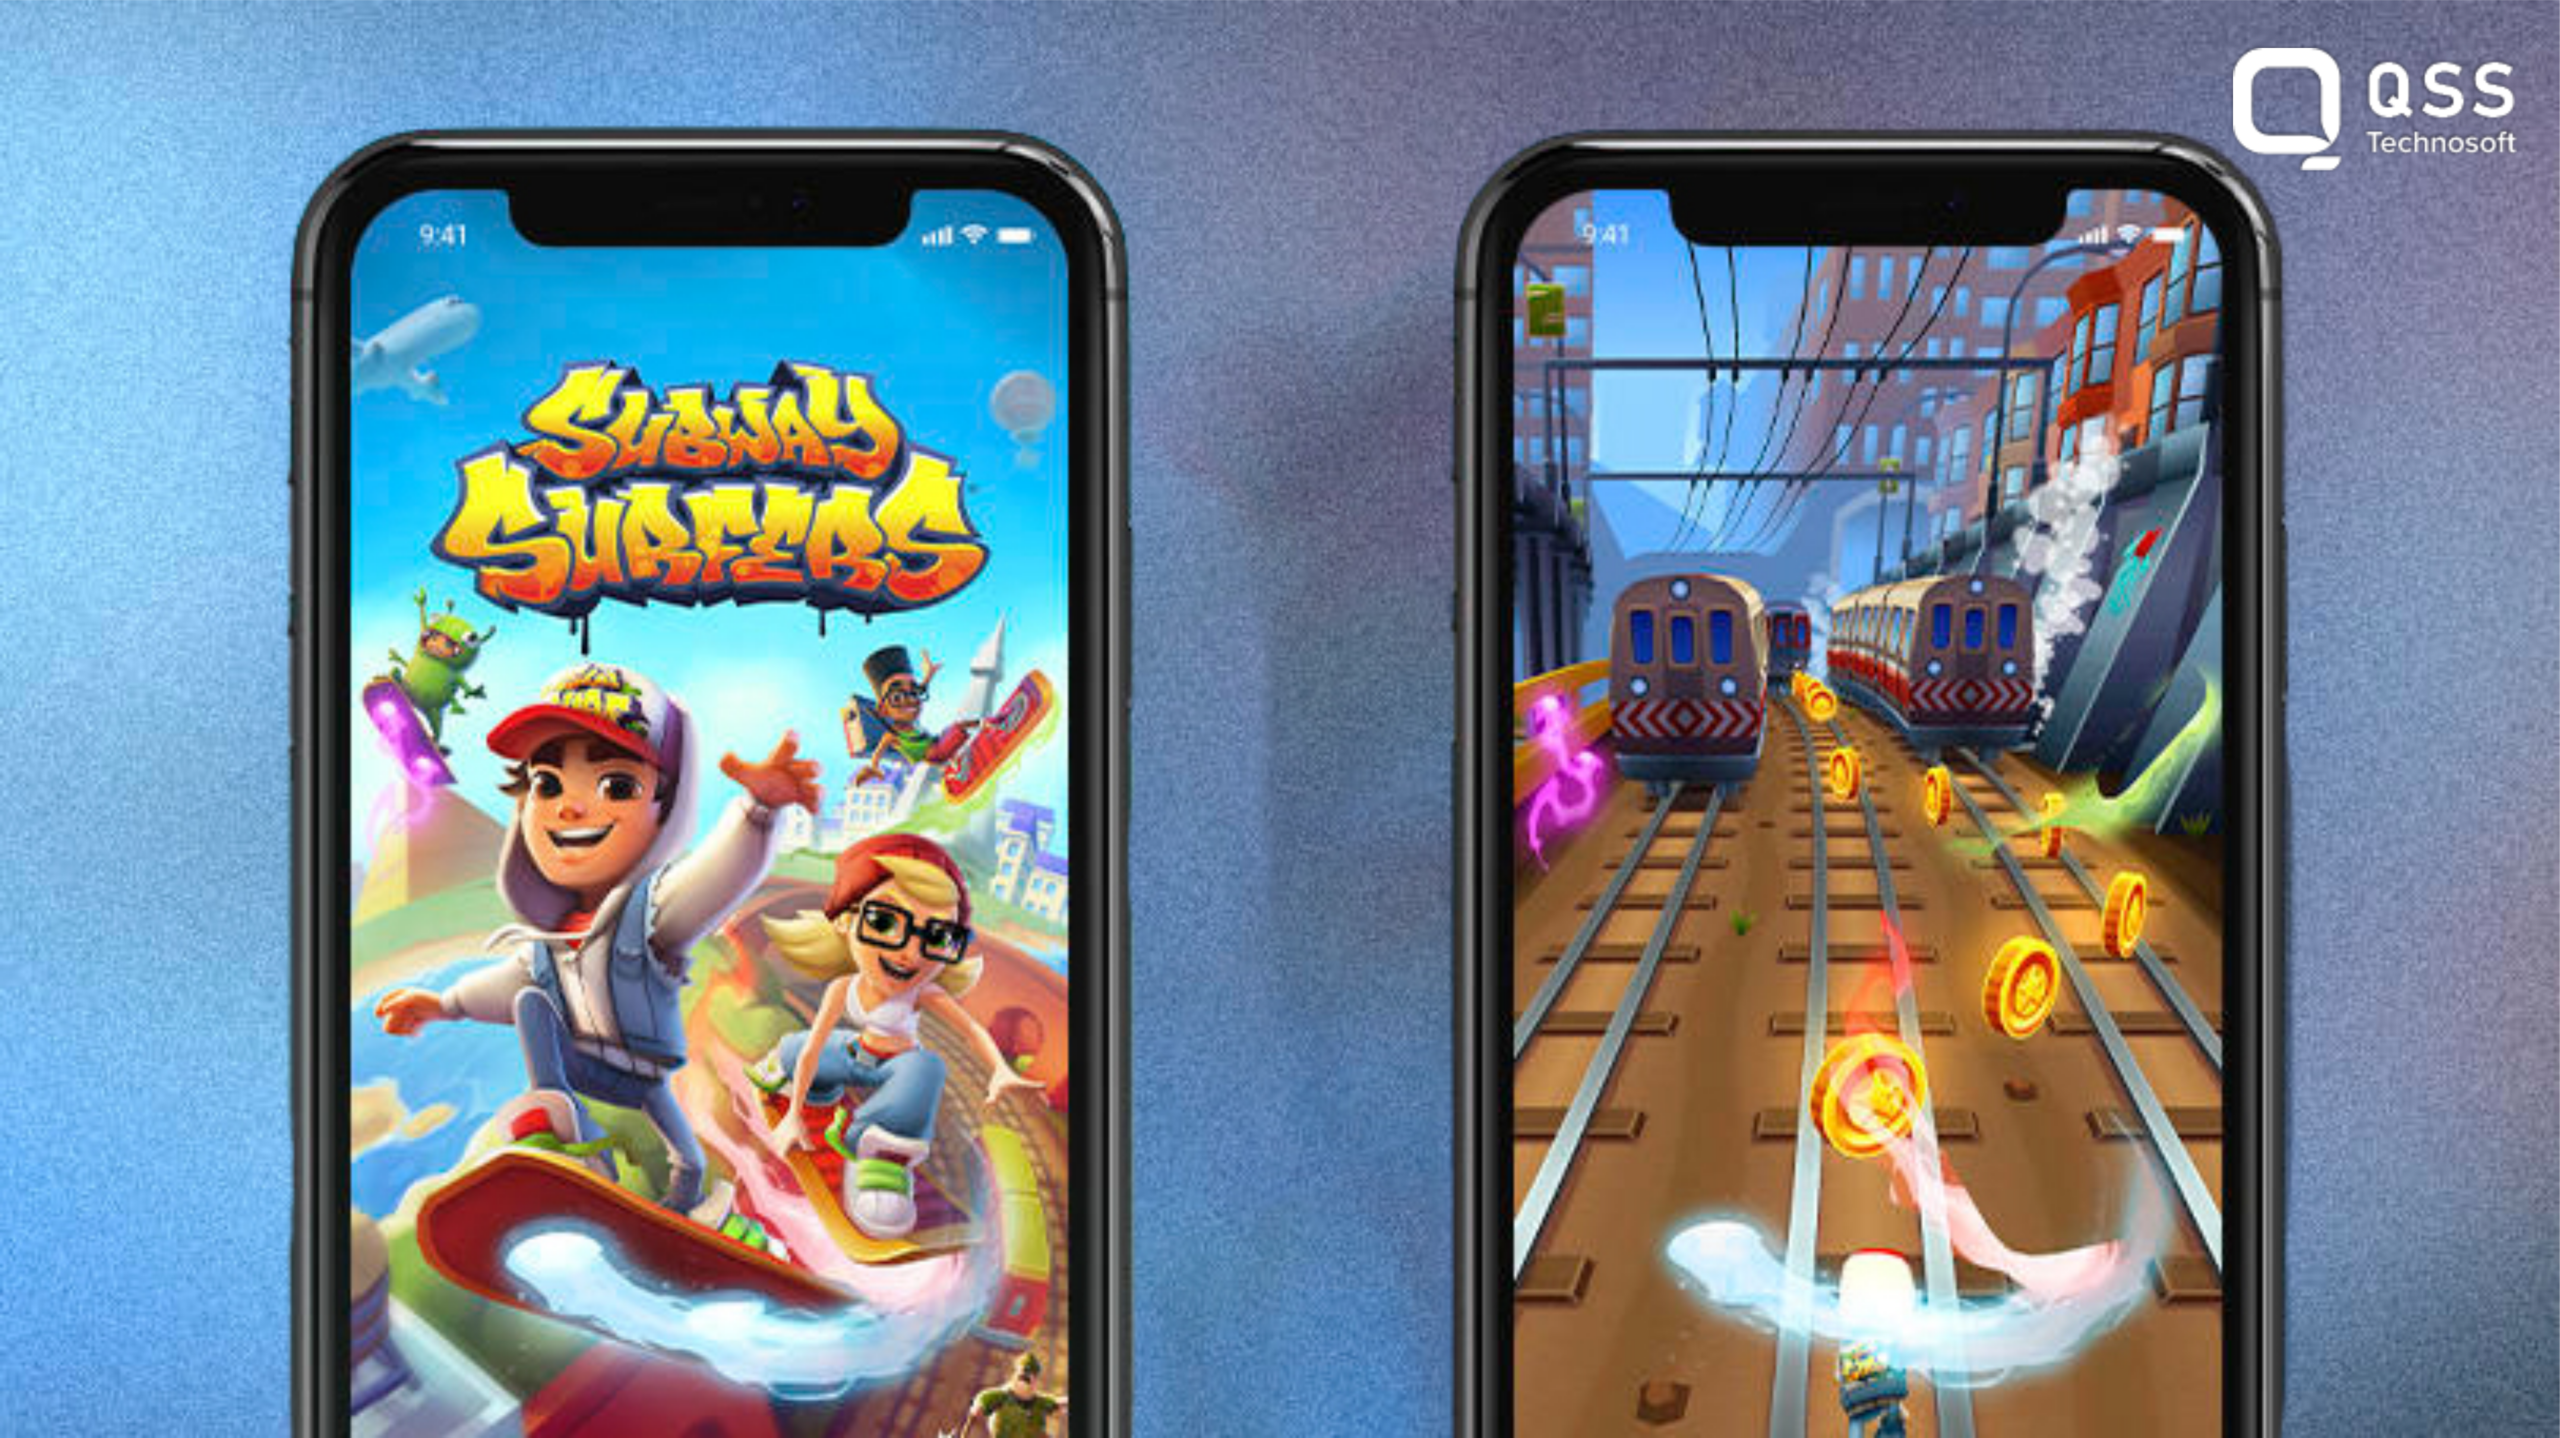 Want to play Subway Surfers? Play this game online for free on